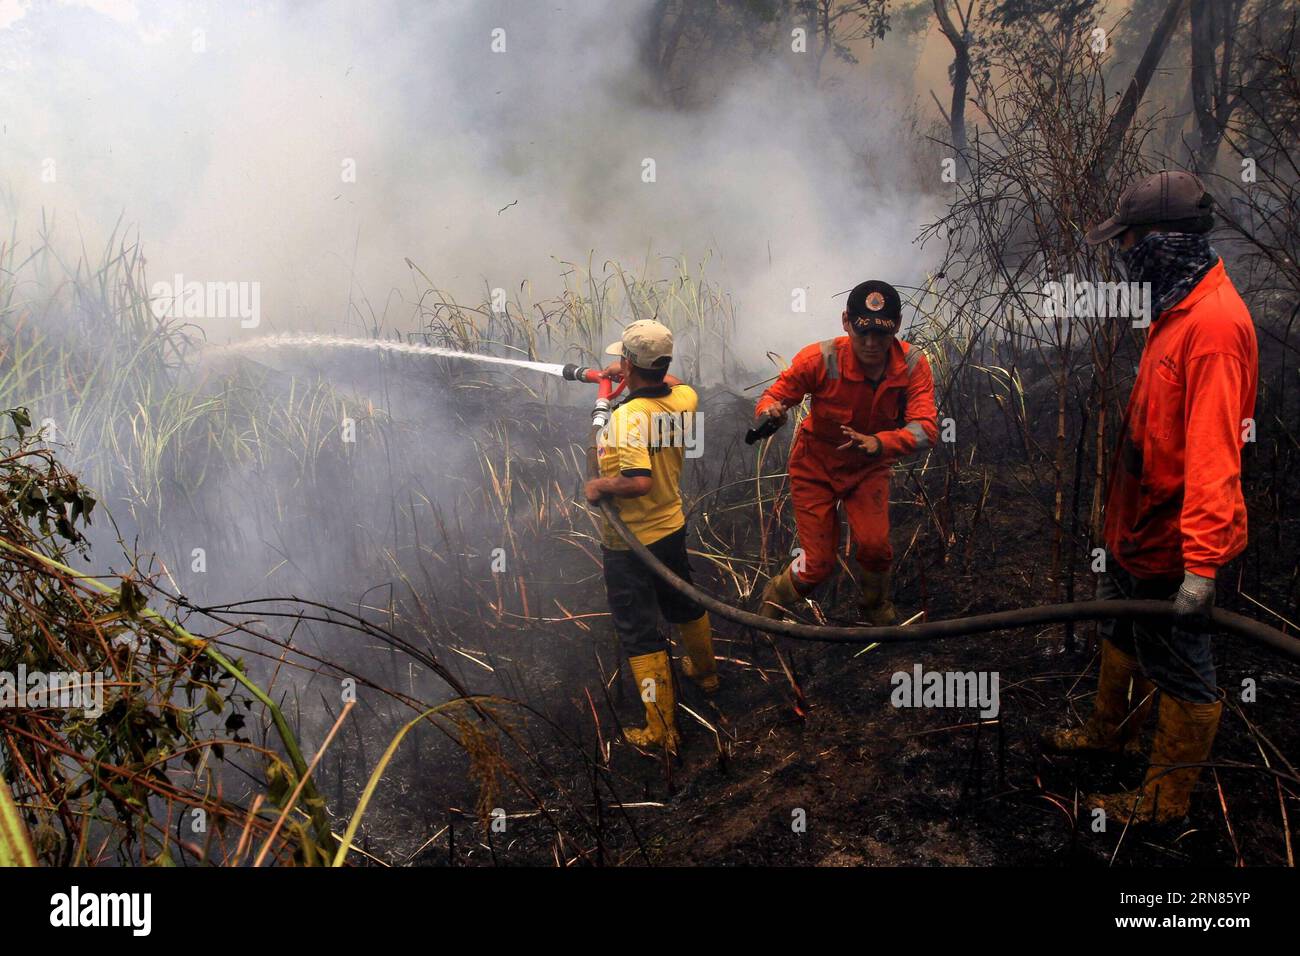 (151008) -- PALEMBANG, Oct. 8, 2015 -- Firefighters try to extinguish a fire on a peatland in Palembang, Indonesia, Oct. 8, 2015. Indonesian President Joko Widodo said on Thursday that he had sought help from Singapore, Malaysia, Russia and Japan to extinguish the forest fire whose smoke has affected Singapore and Malaysia. ) INDONESIA-PALEMBANG-FOREST FIRE MuhammadxFadjrie PUBLICATIONxNOTxINxCHN   151008 Palembang OCT 8 2015 Firefighters Try to extinguisher a Fire ON a peatland in Palembang Indonesia OCT 8 2015 Indonesian President Joko Widodo Said ON Thursday Thatcher he had sought Help from Stock Photo